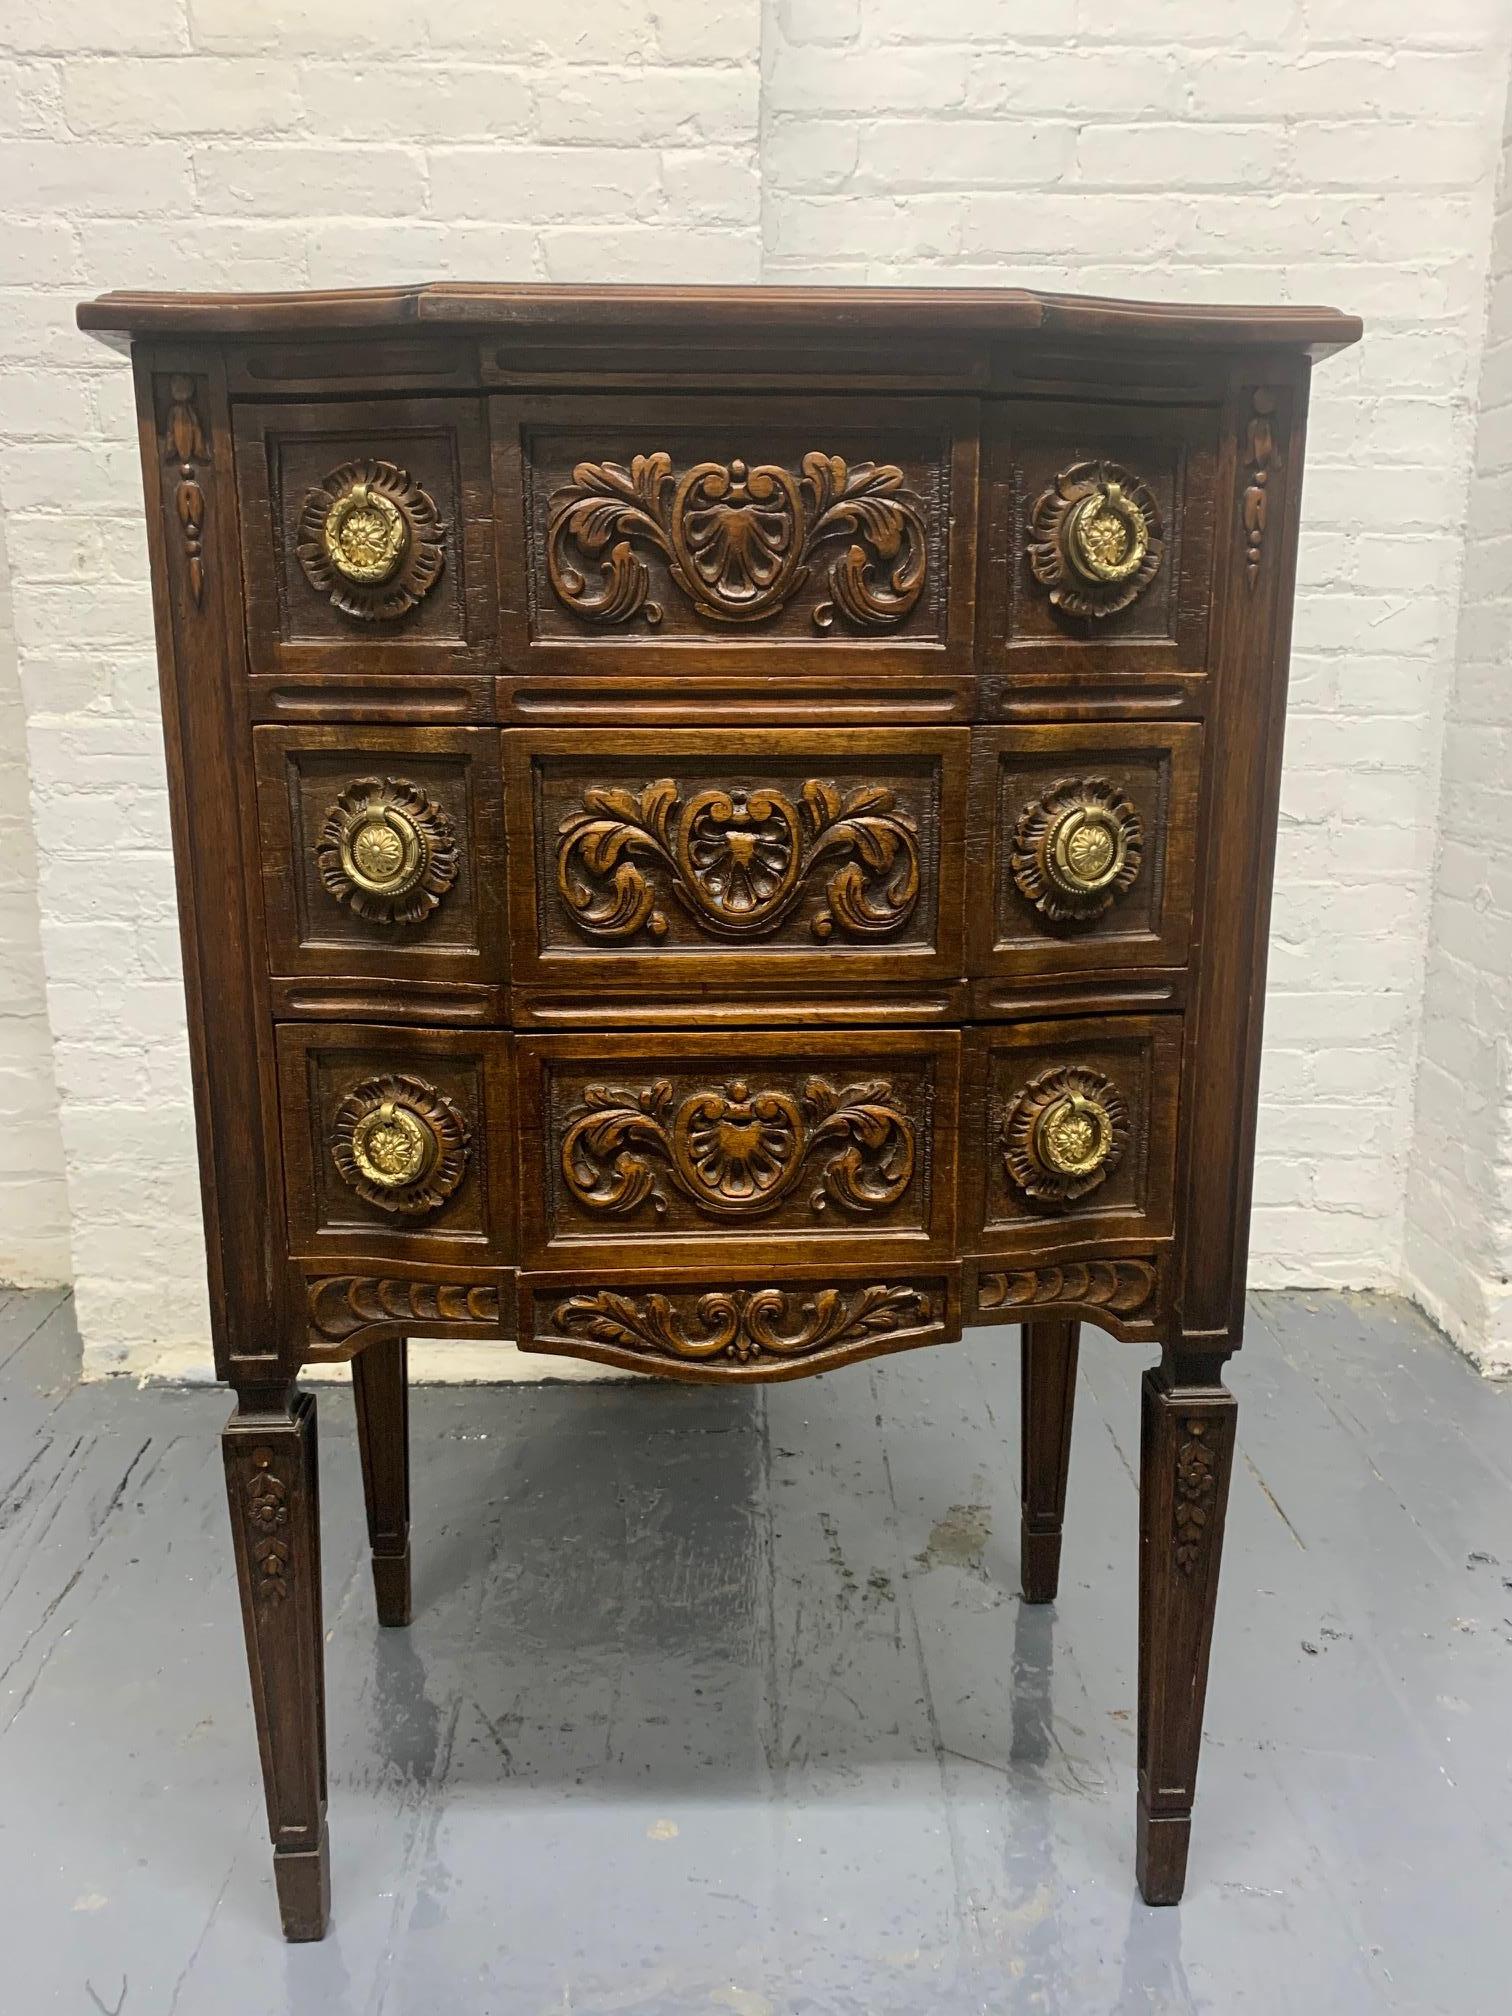 Pair of walnut antique Belgium chests. The chests are in the original condition. Has brass handles, three pullout / pull-out drawers, handmade dovetails to the drawers and a nicely carved front. The chests have a paneled back and a made in Belgium